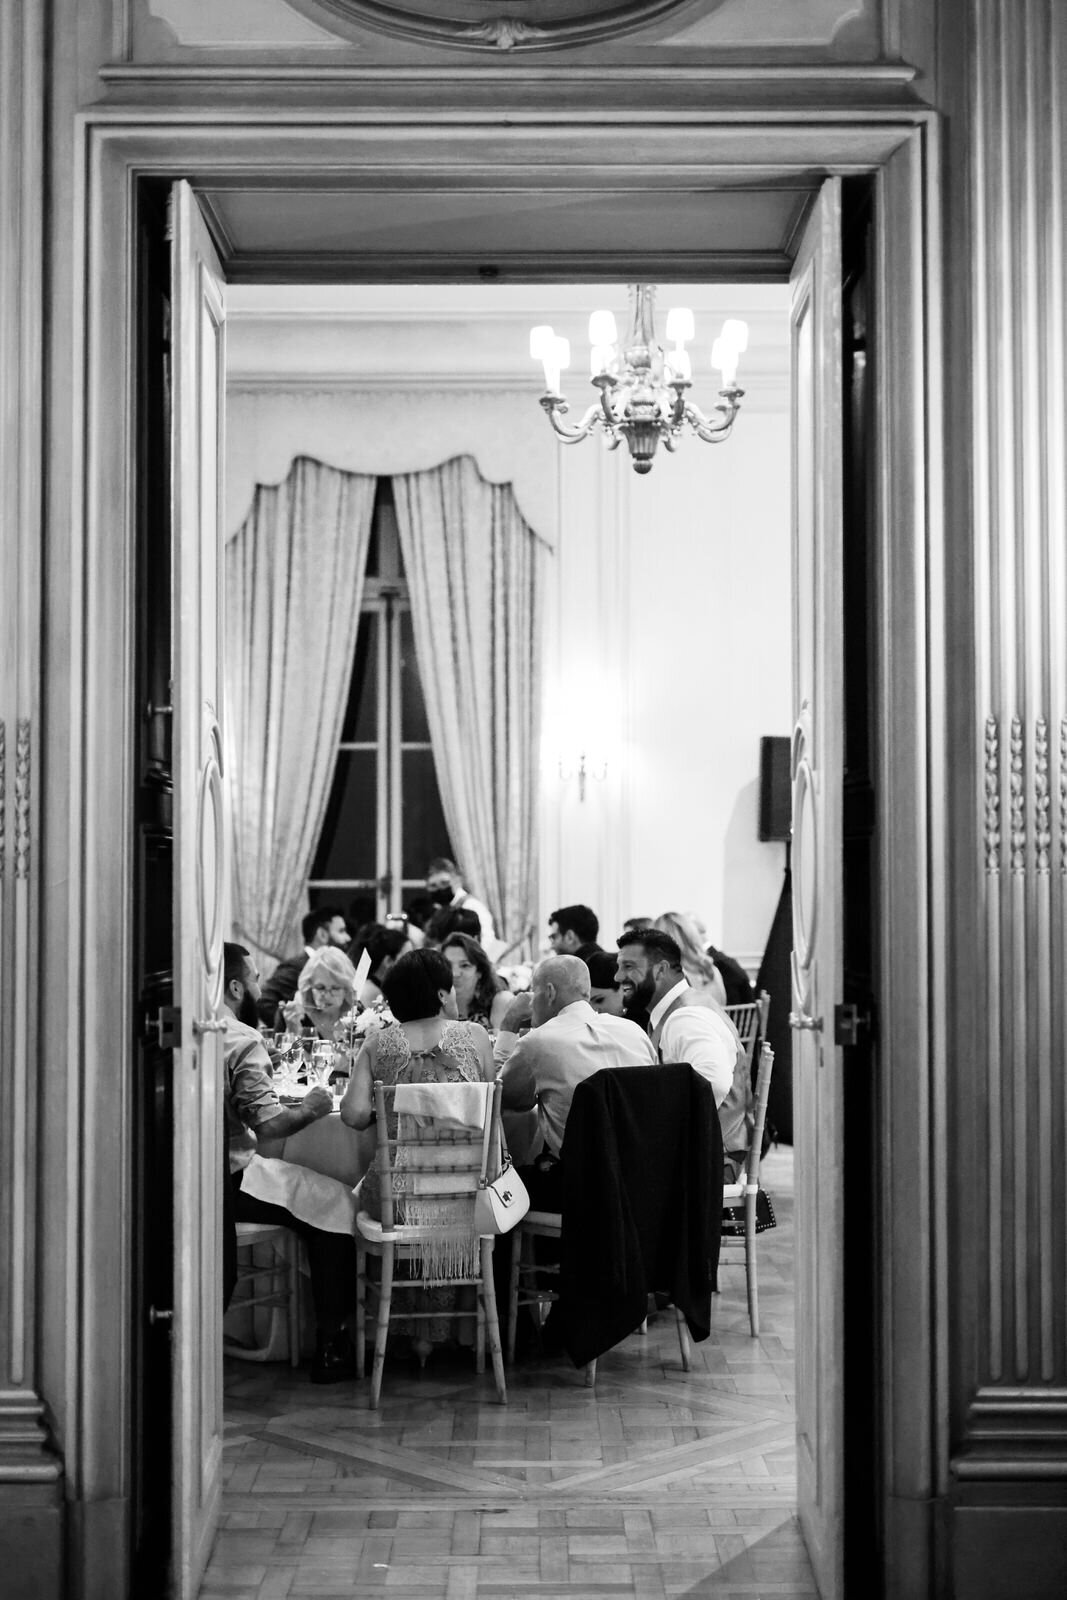 Candid wedding reception photography at the European DC Wedding Venue, the Meridian House.